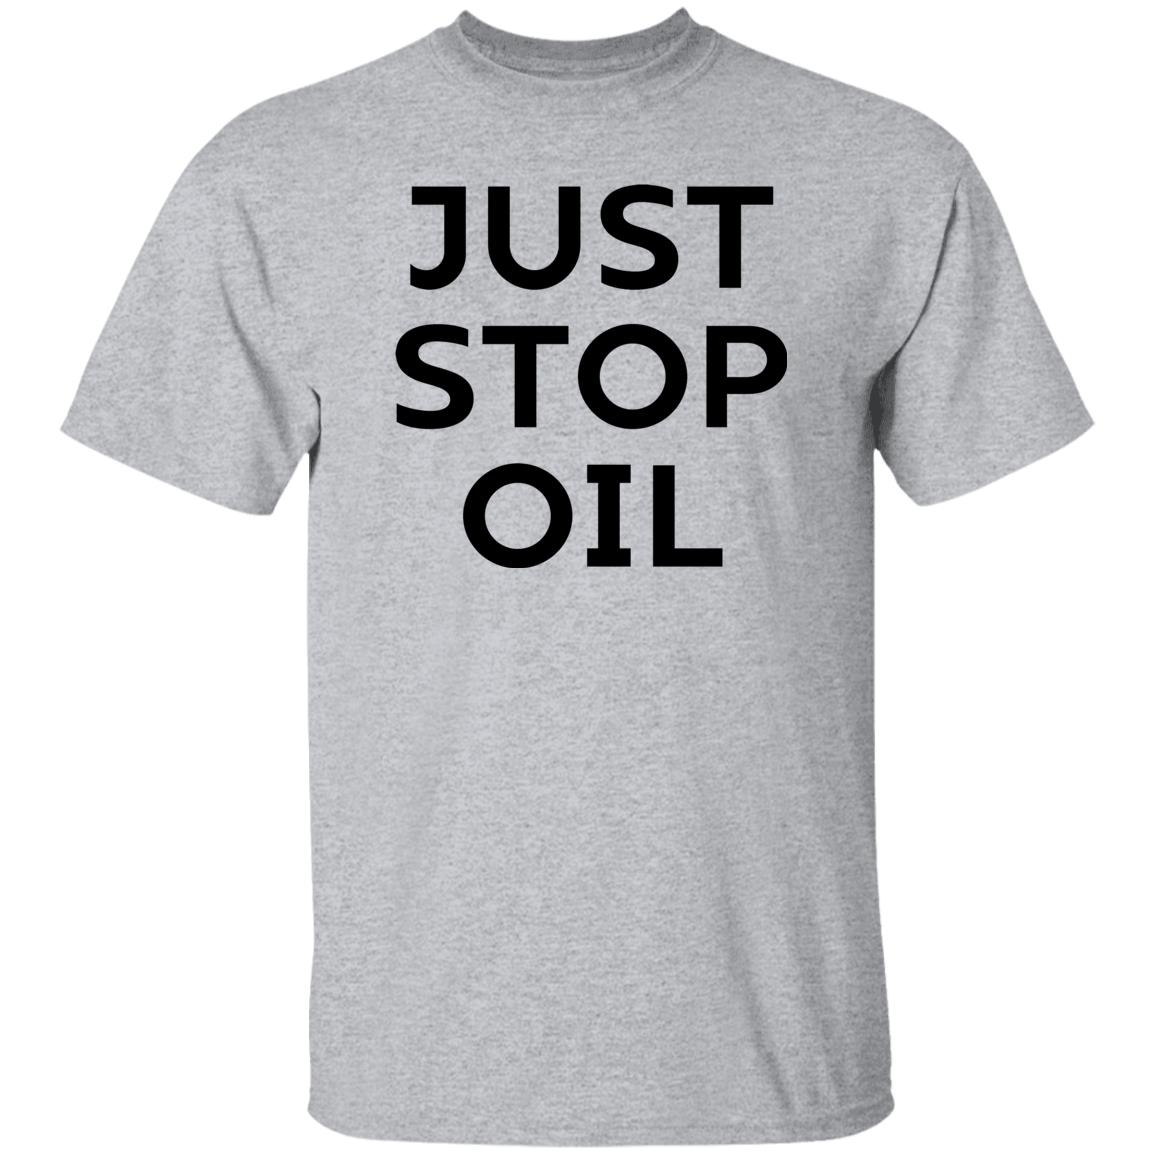 Just Stop Oil Shirt Protesters Have Glued Themselves To A Vincent Van Gogh Painting At London’s Courtauld Gallery Talktv